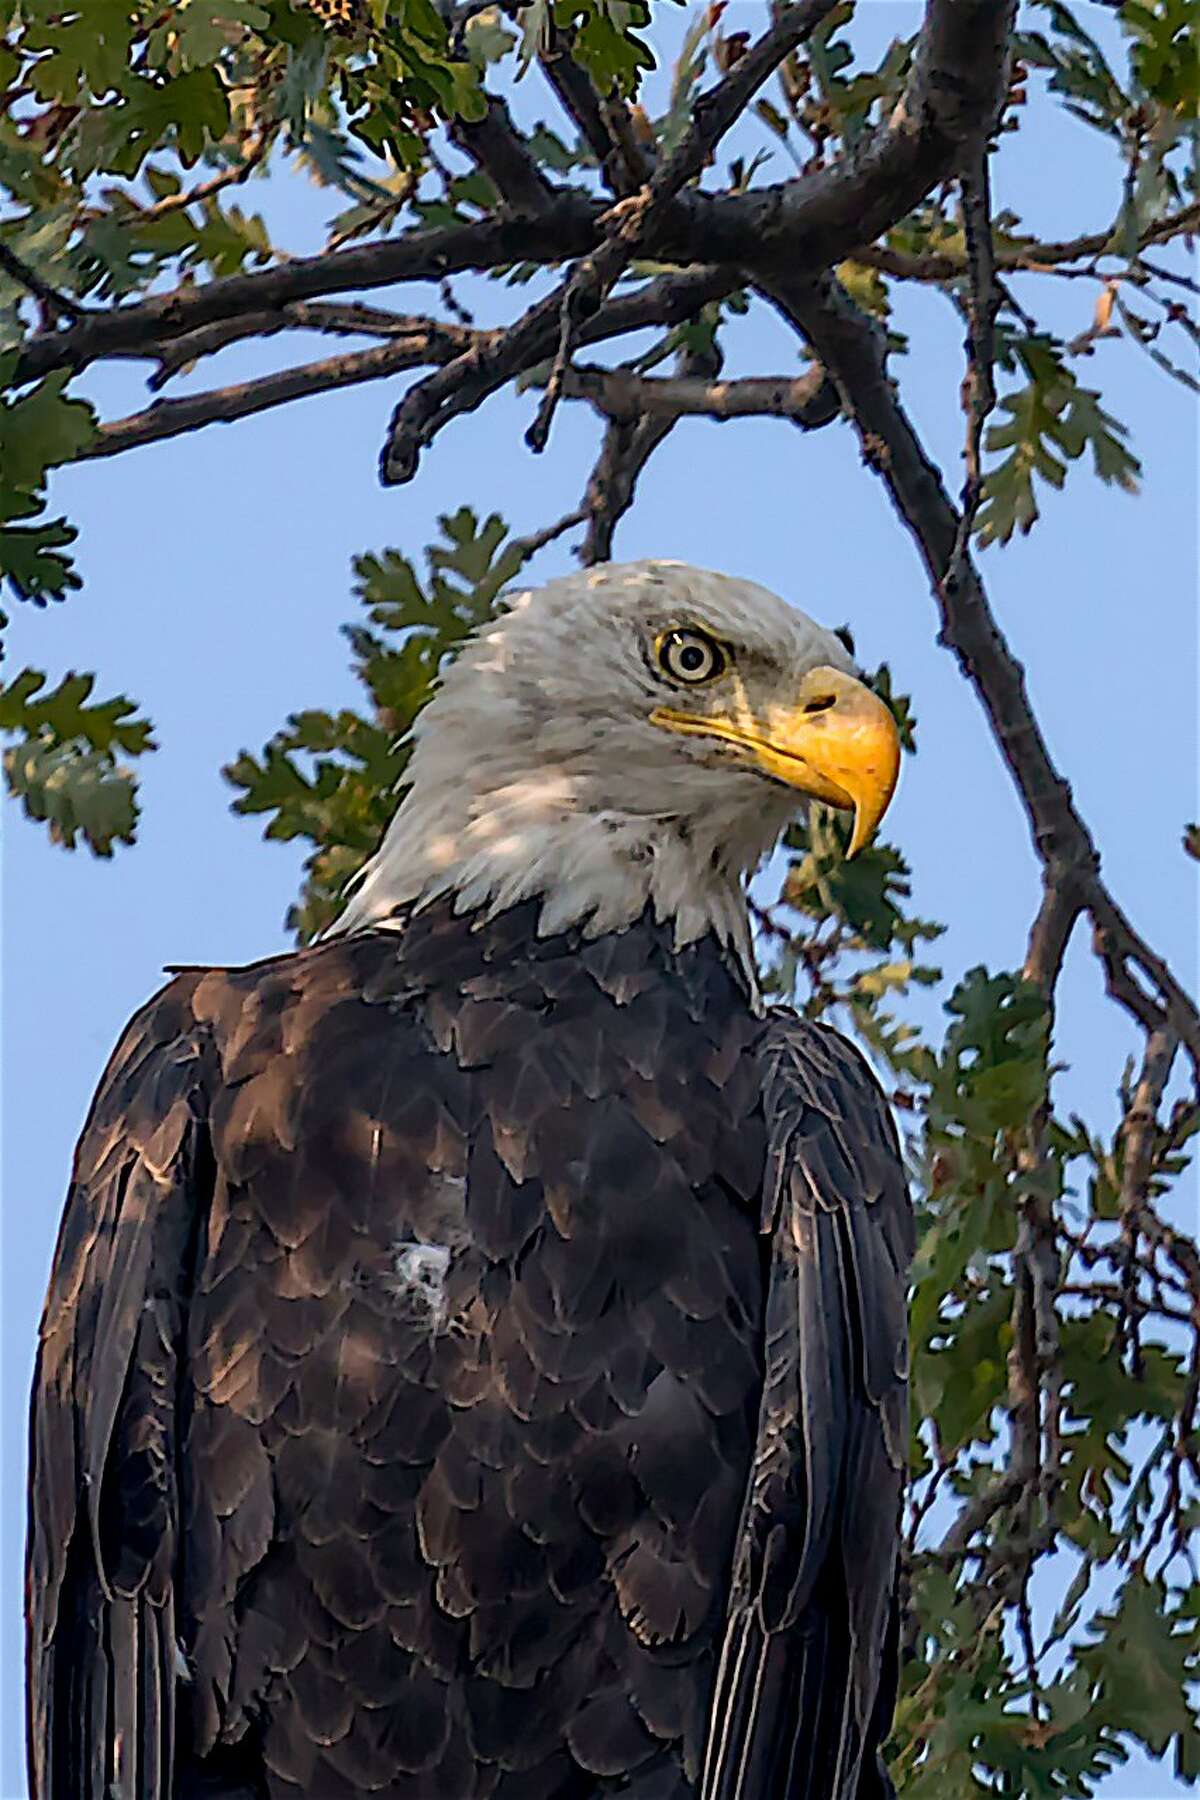 A bald eagle at perch in oak tree to survey foothills of Contra Costa County